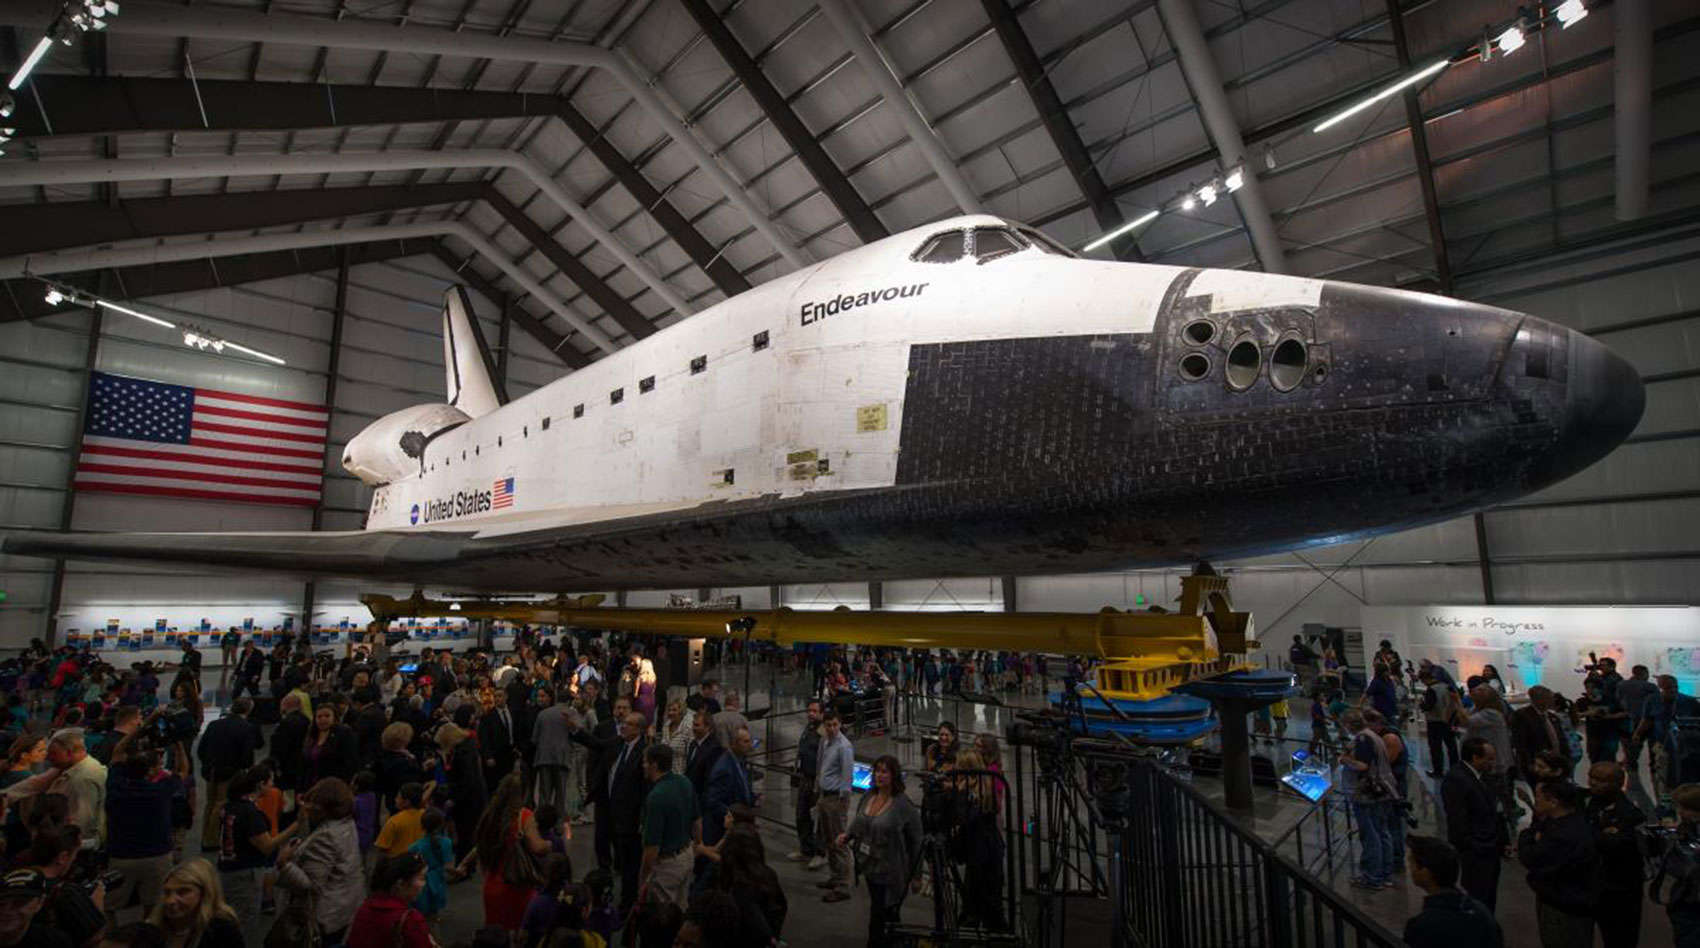 NASA recently pulled the water tanks from the space shuttle Endeavor.